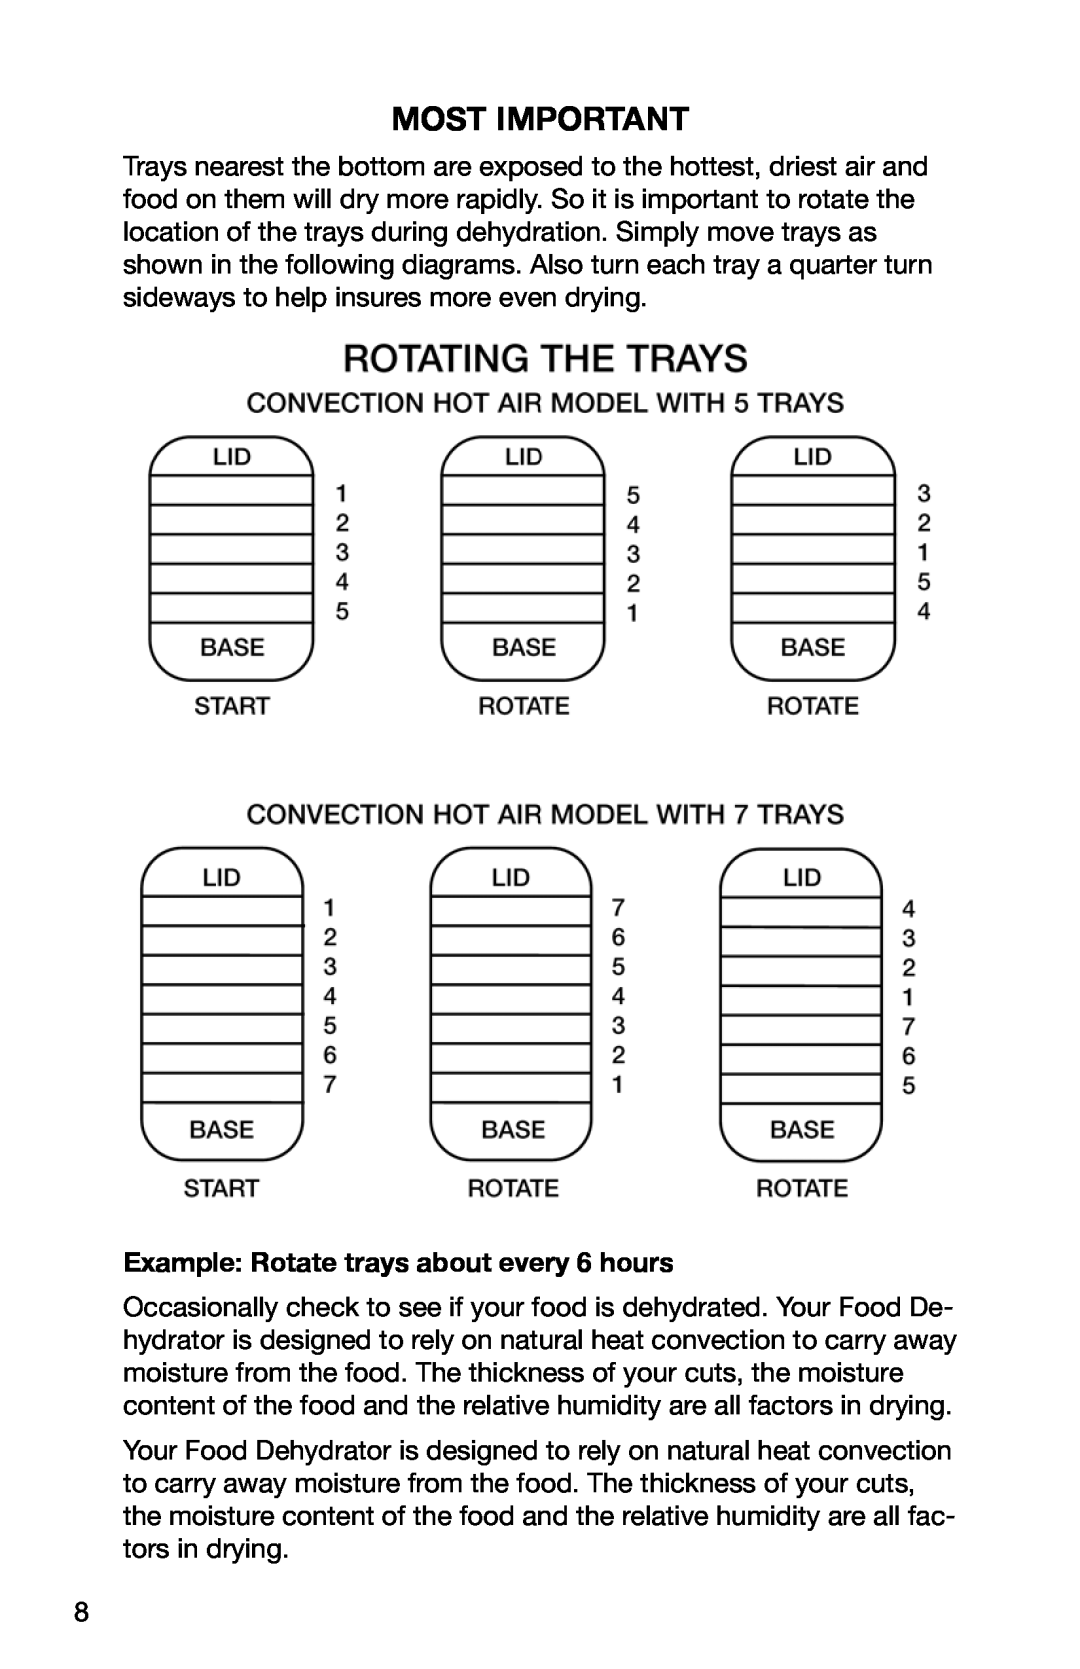 Ronco Food Saver manual Most Important, Example Rotate trays about every 6 hours 